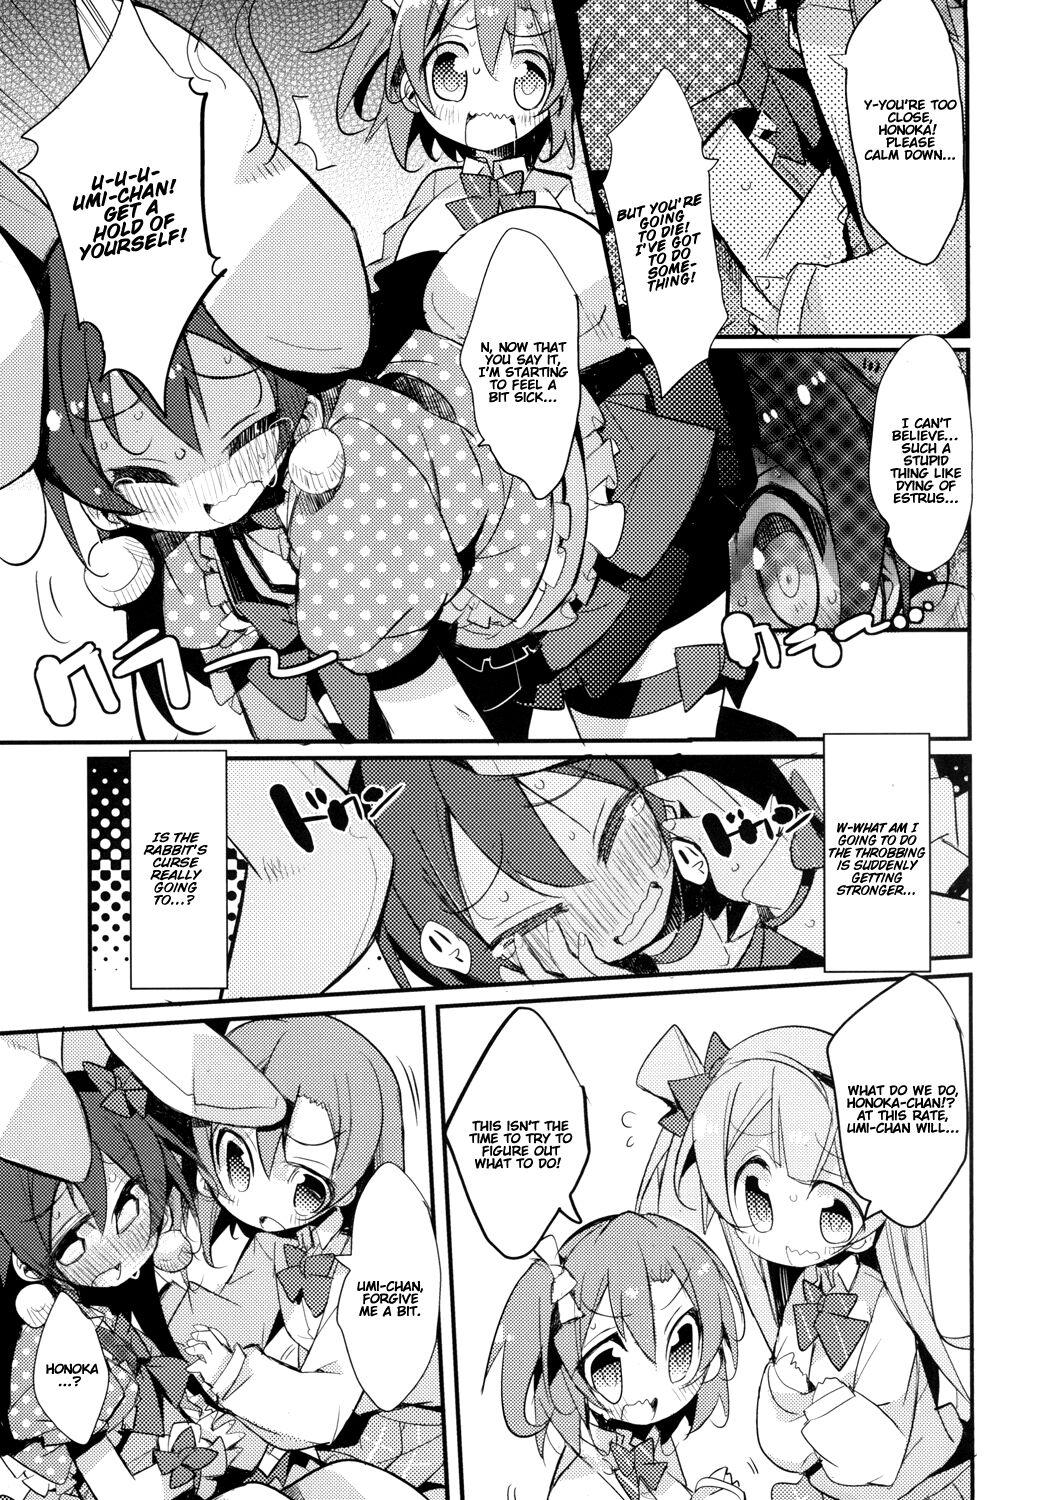 Highschool UMIMIMIX - Love live Girl Gets Fucked - Page 7